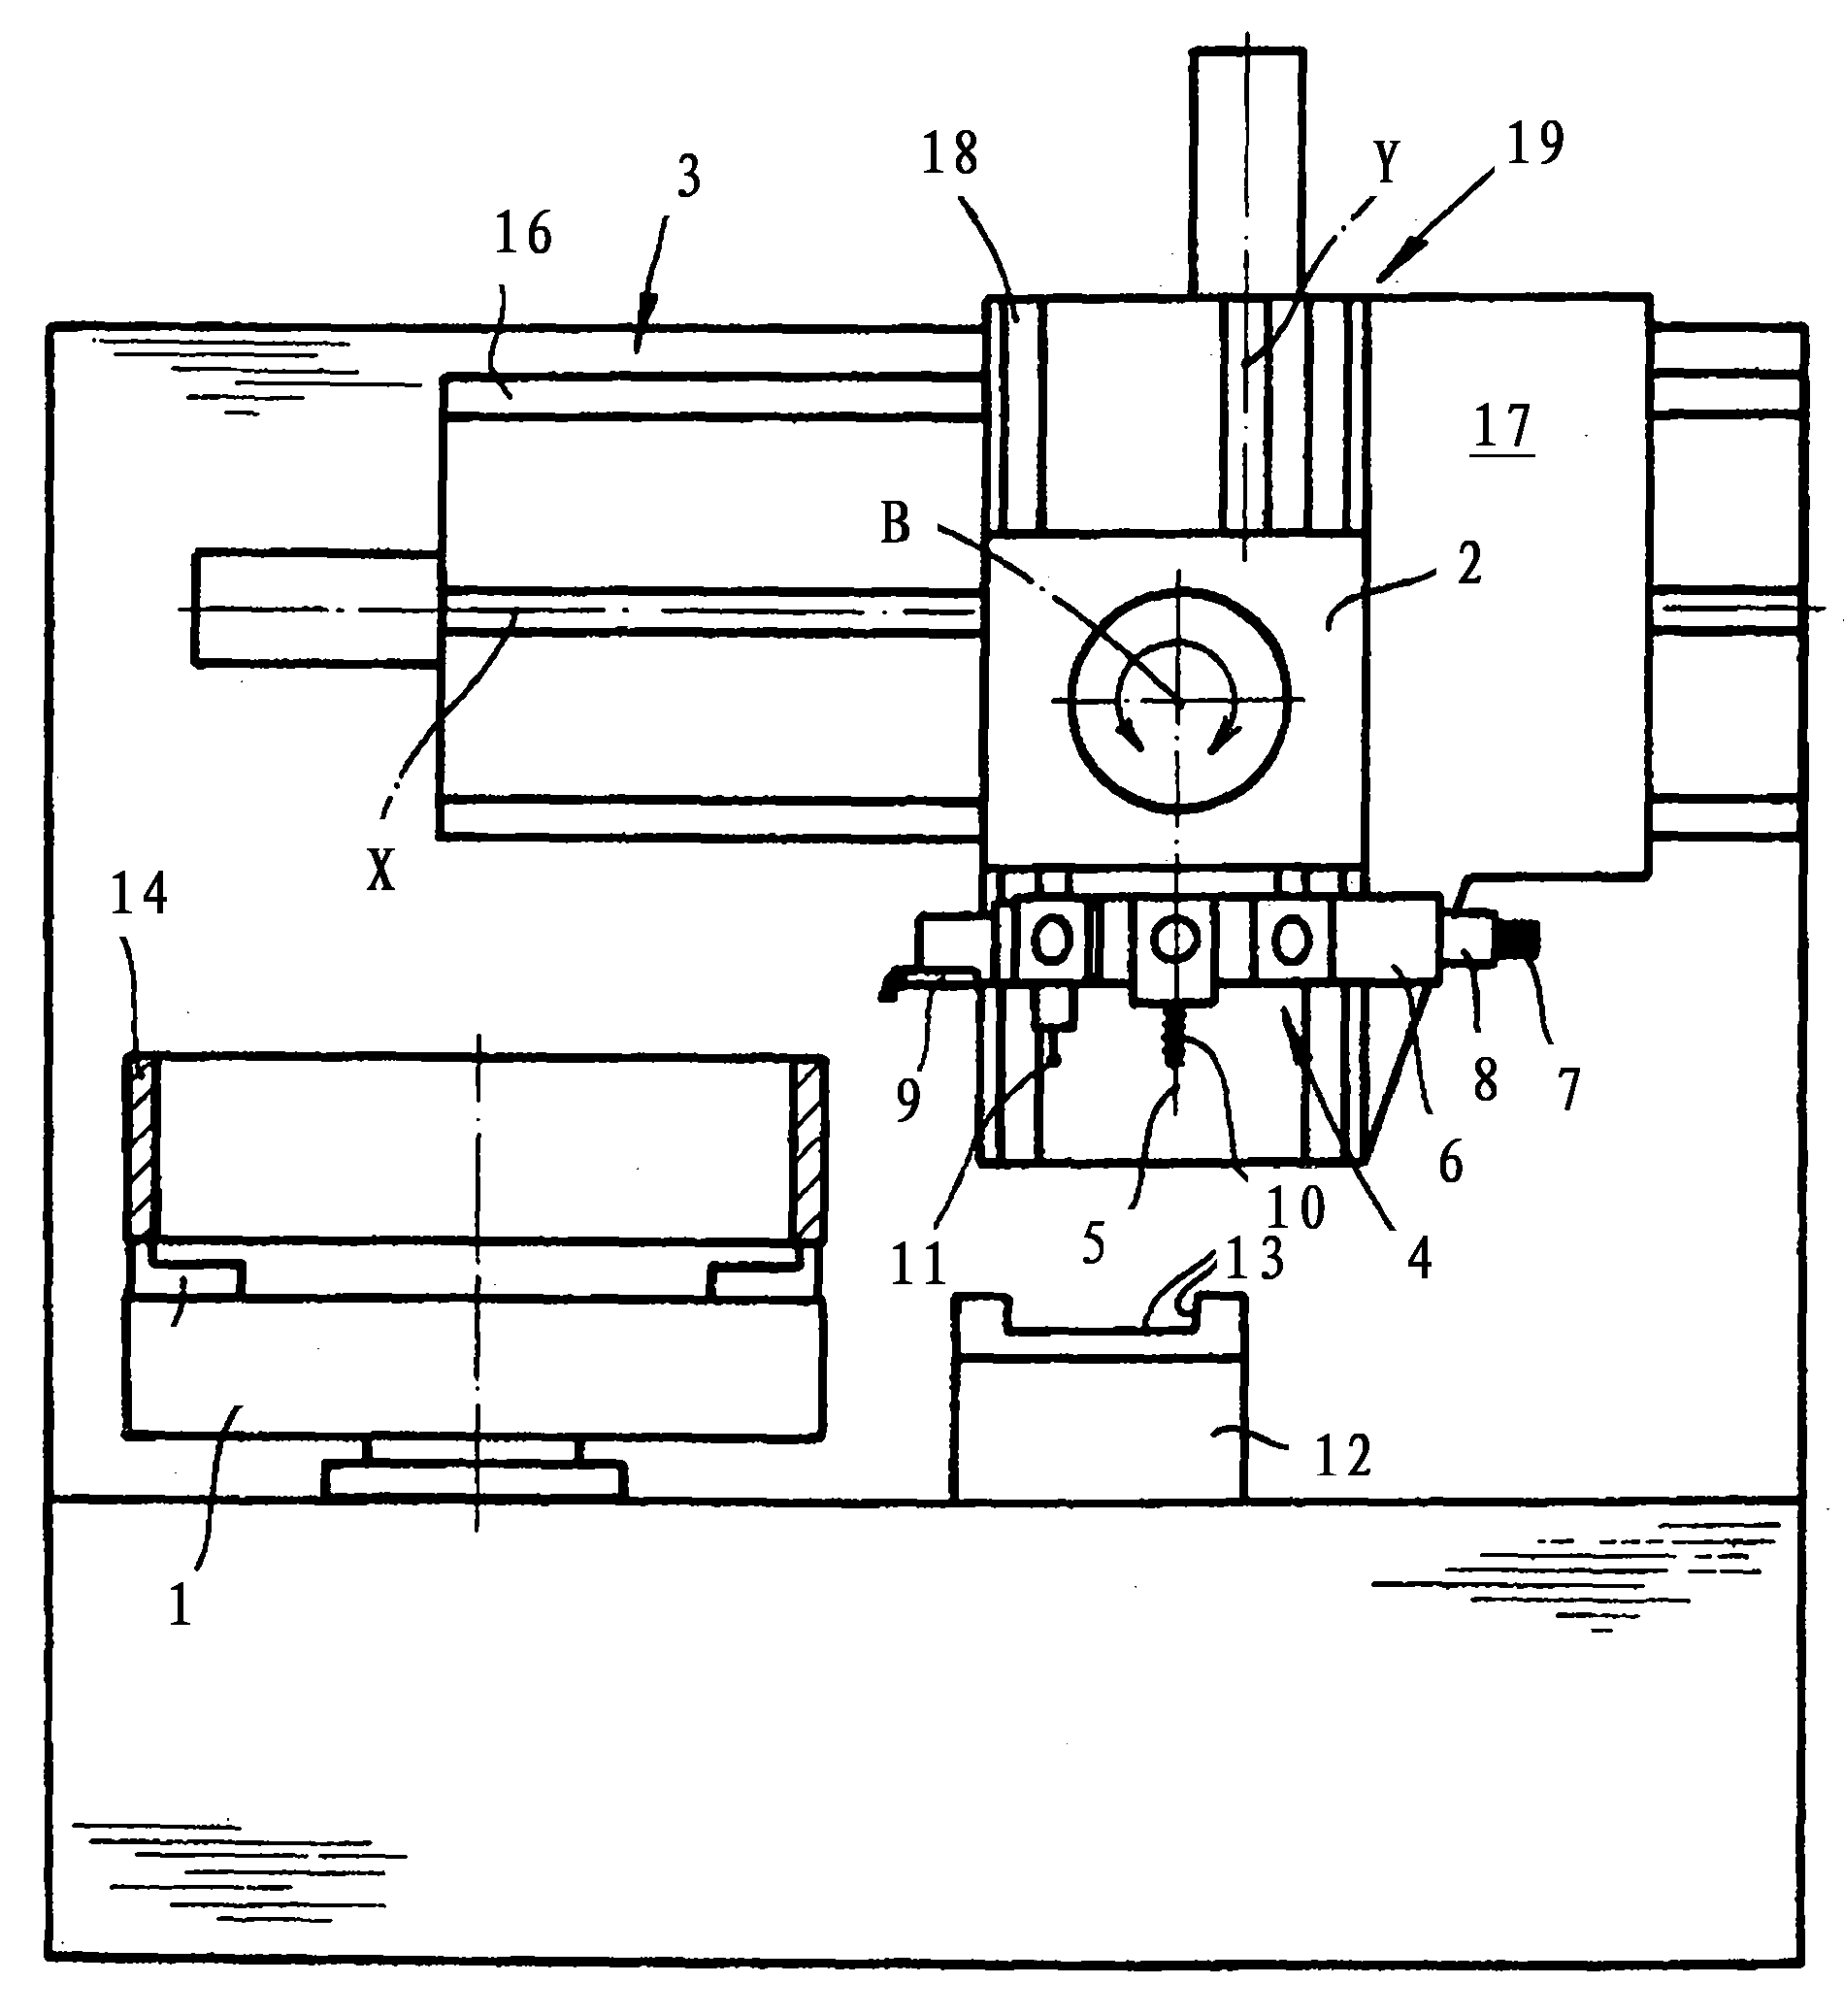 Device for performing fine machining on annular workpiece